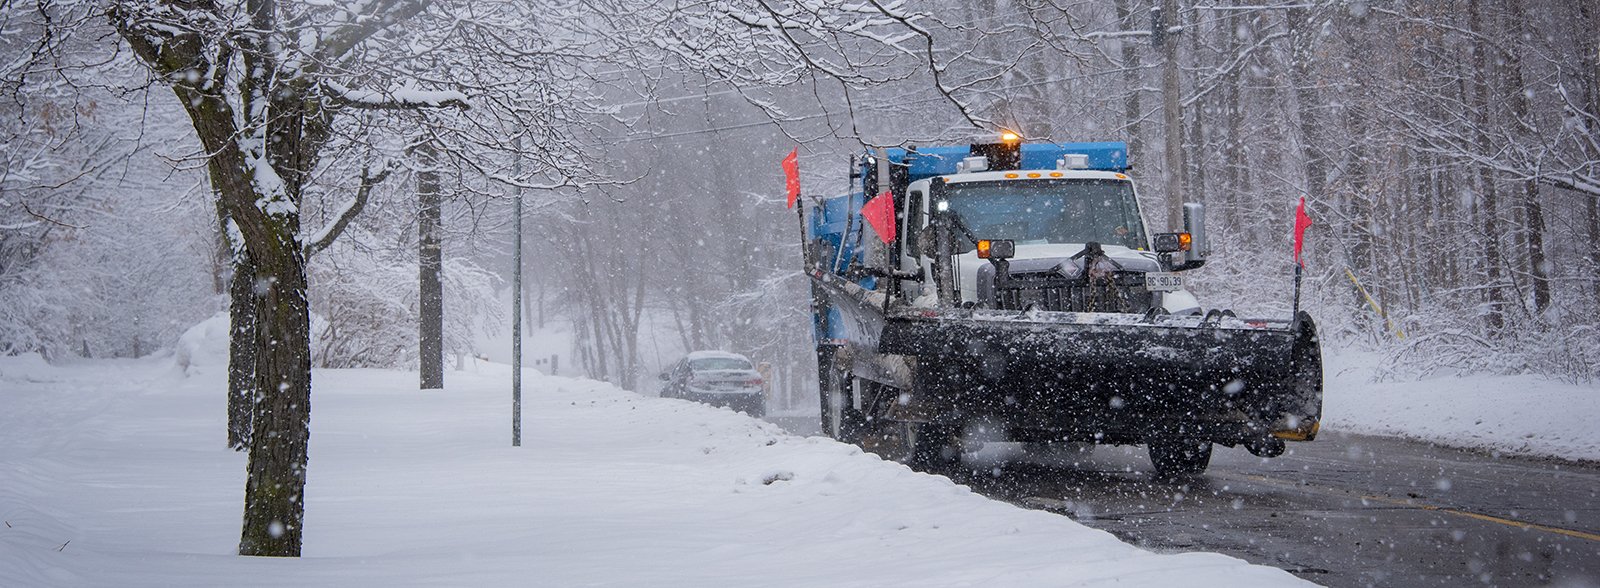 A snow plow clears snow on a City street